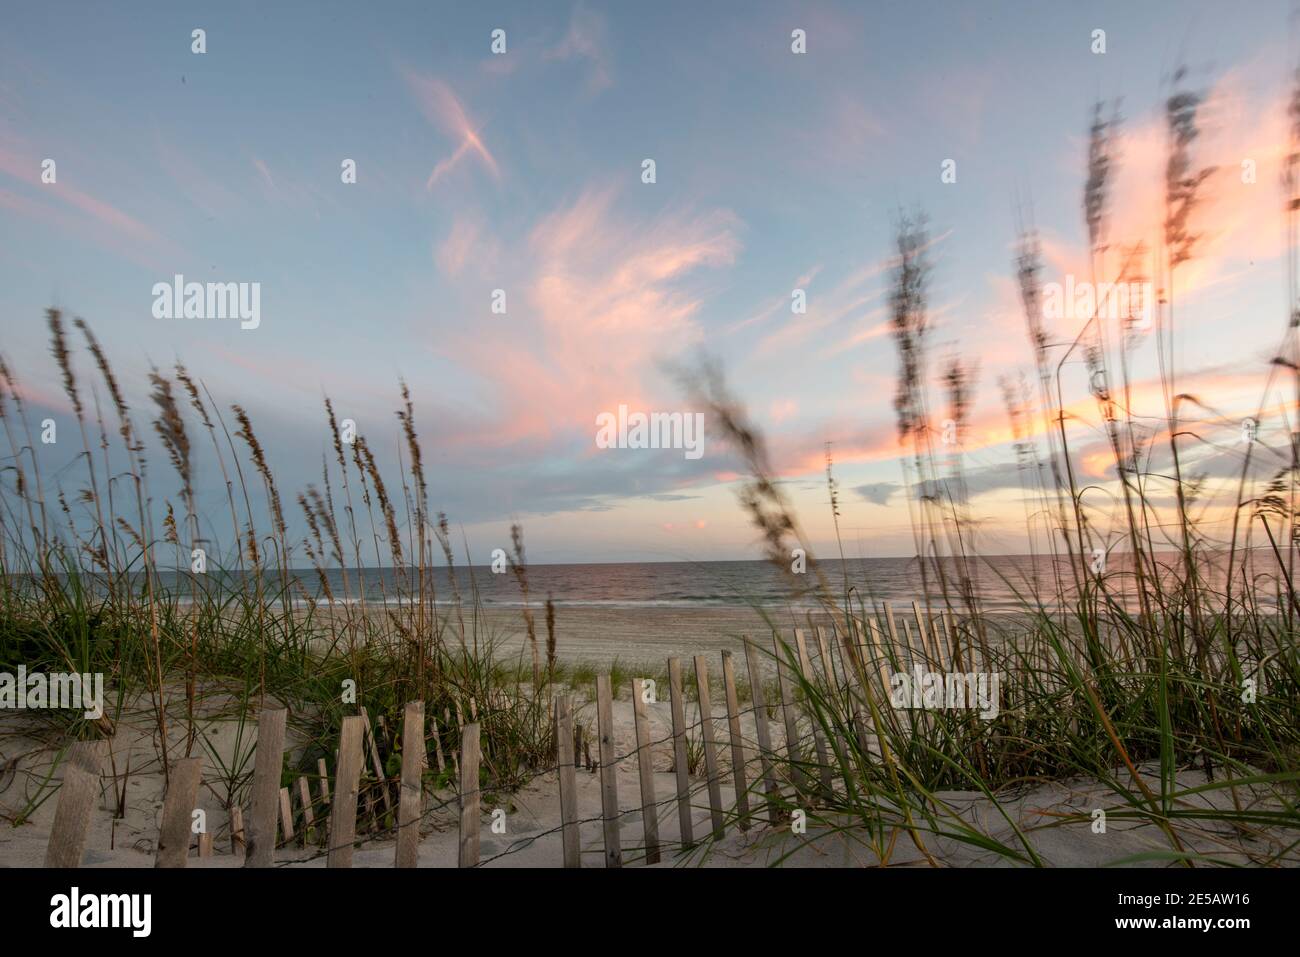 Sunset creates cotton candy skies over the sand dunes at Atlantic Beach, North Carolina. Sea oats sway in the breeze along the path that leads to the Stock Photo